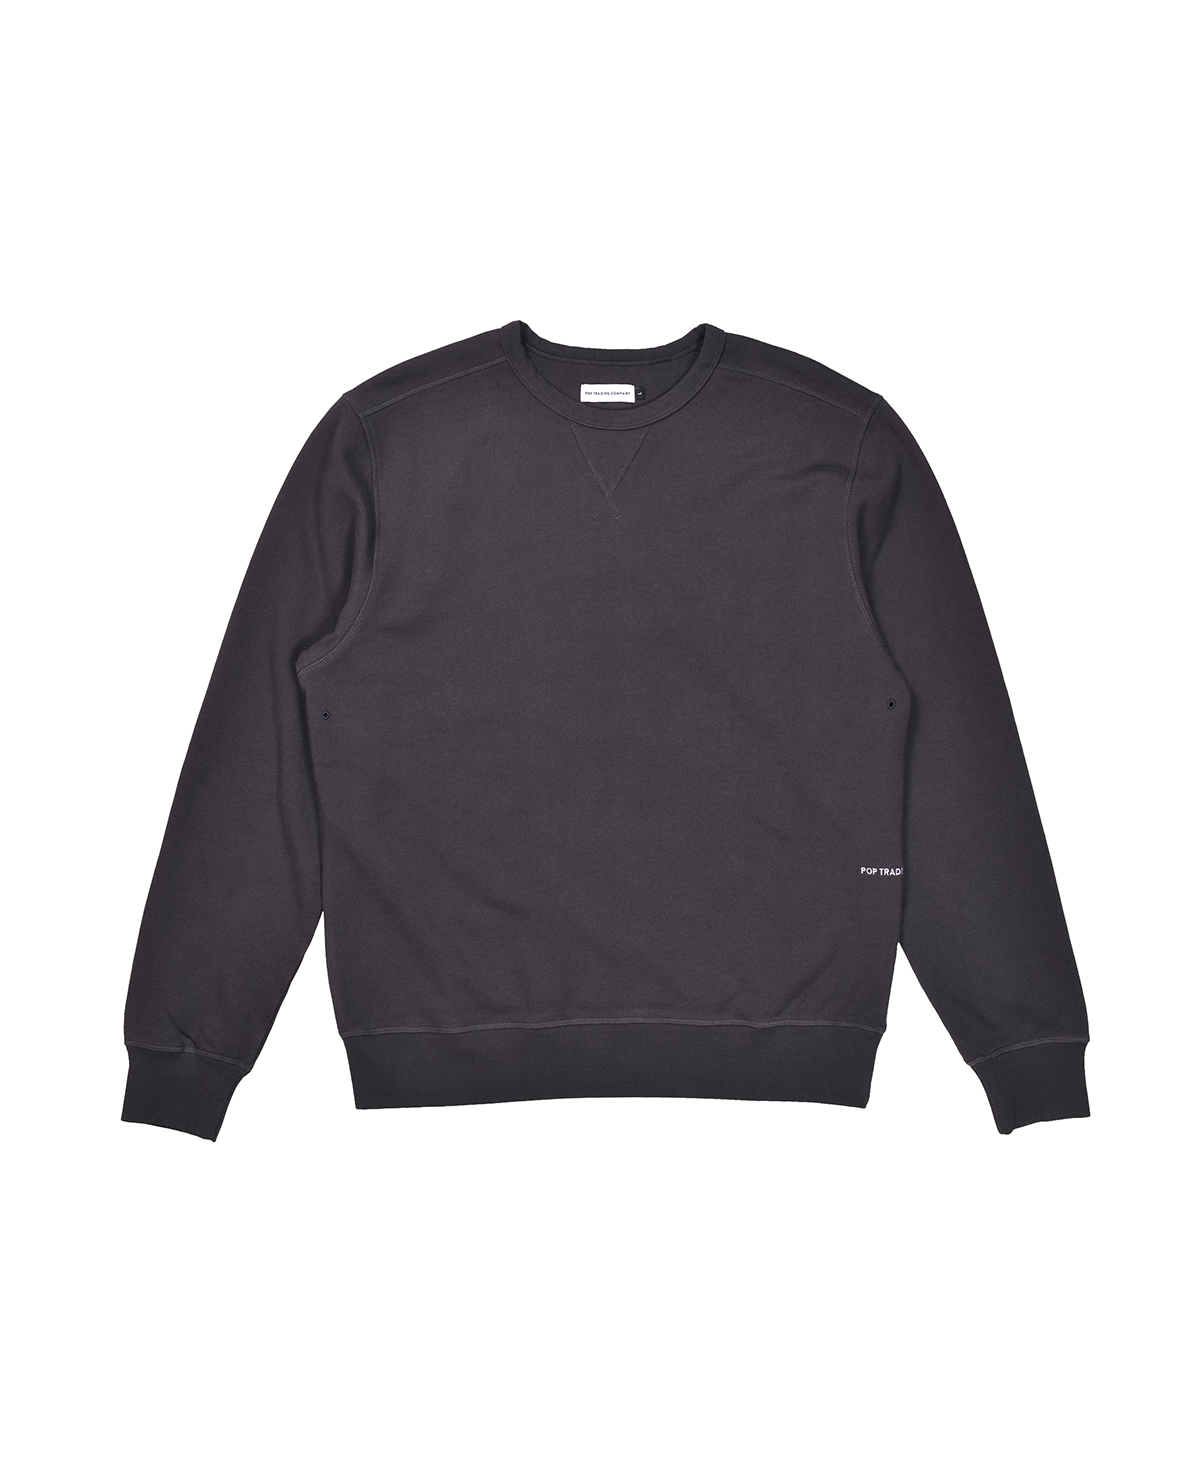 Pop Trading Company AW20 Collection - Pop Trading Company